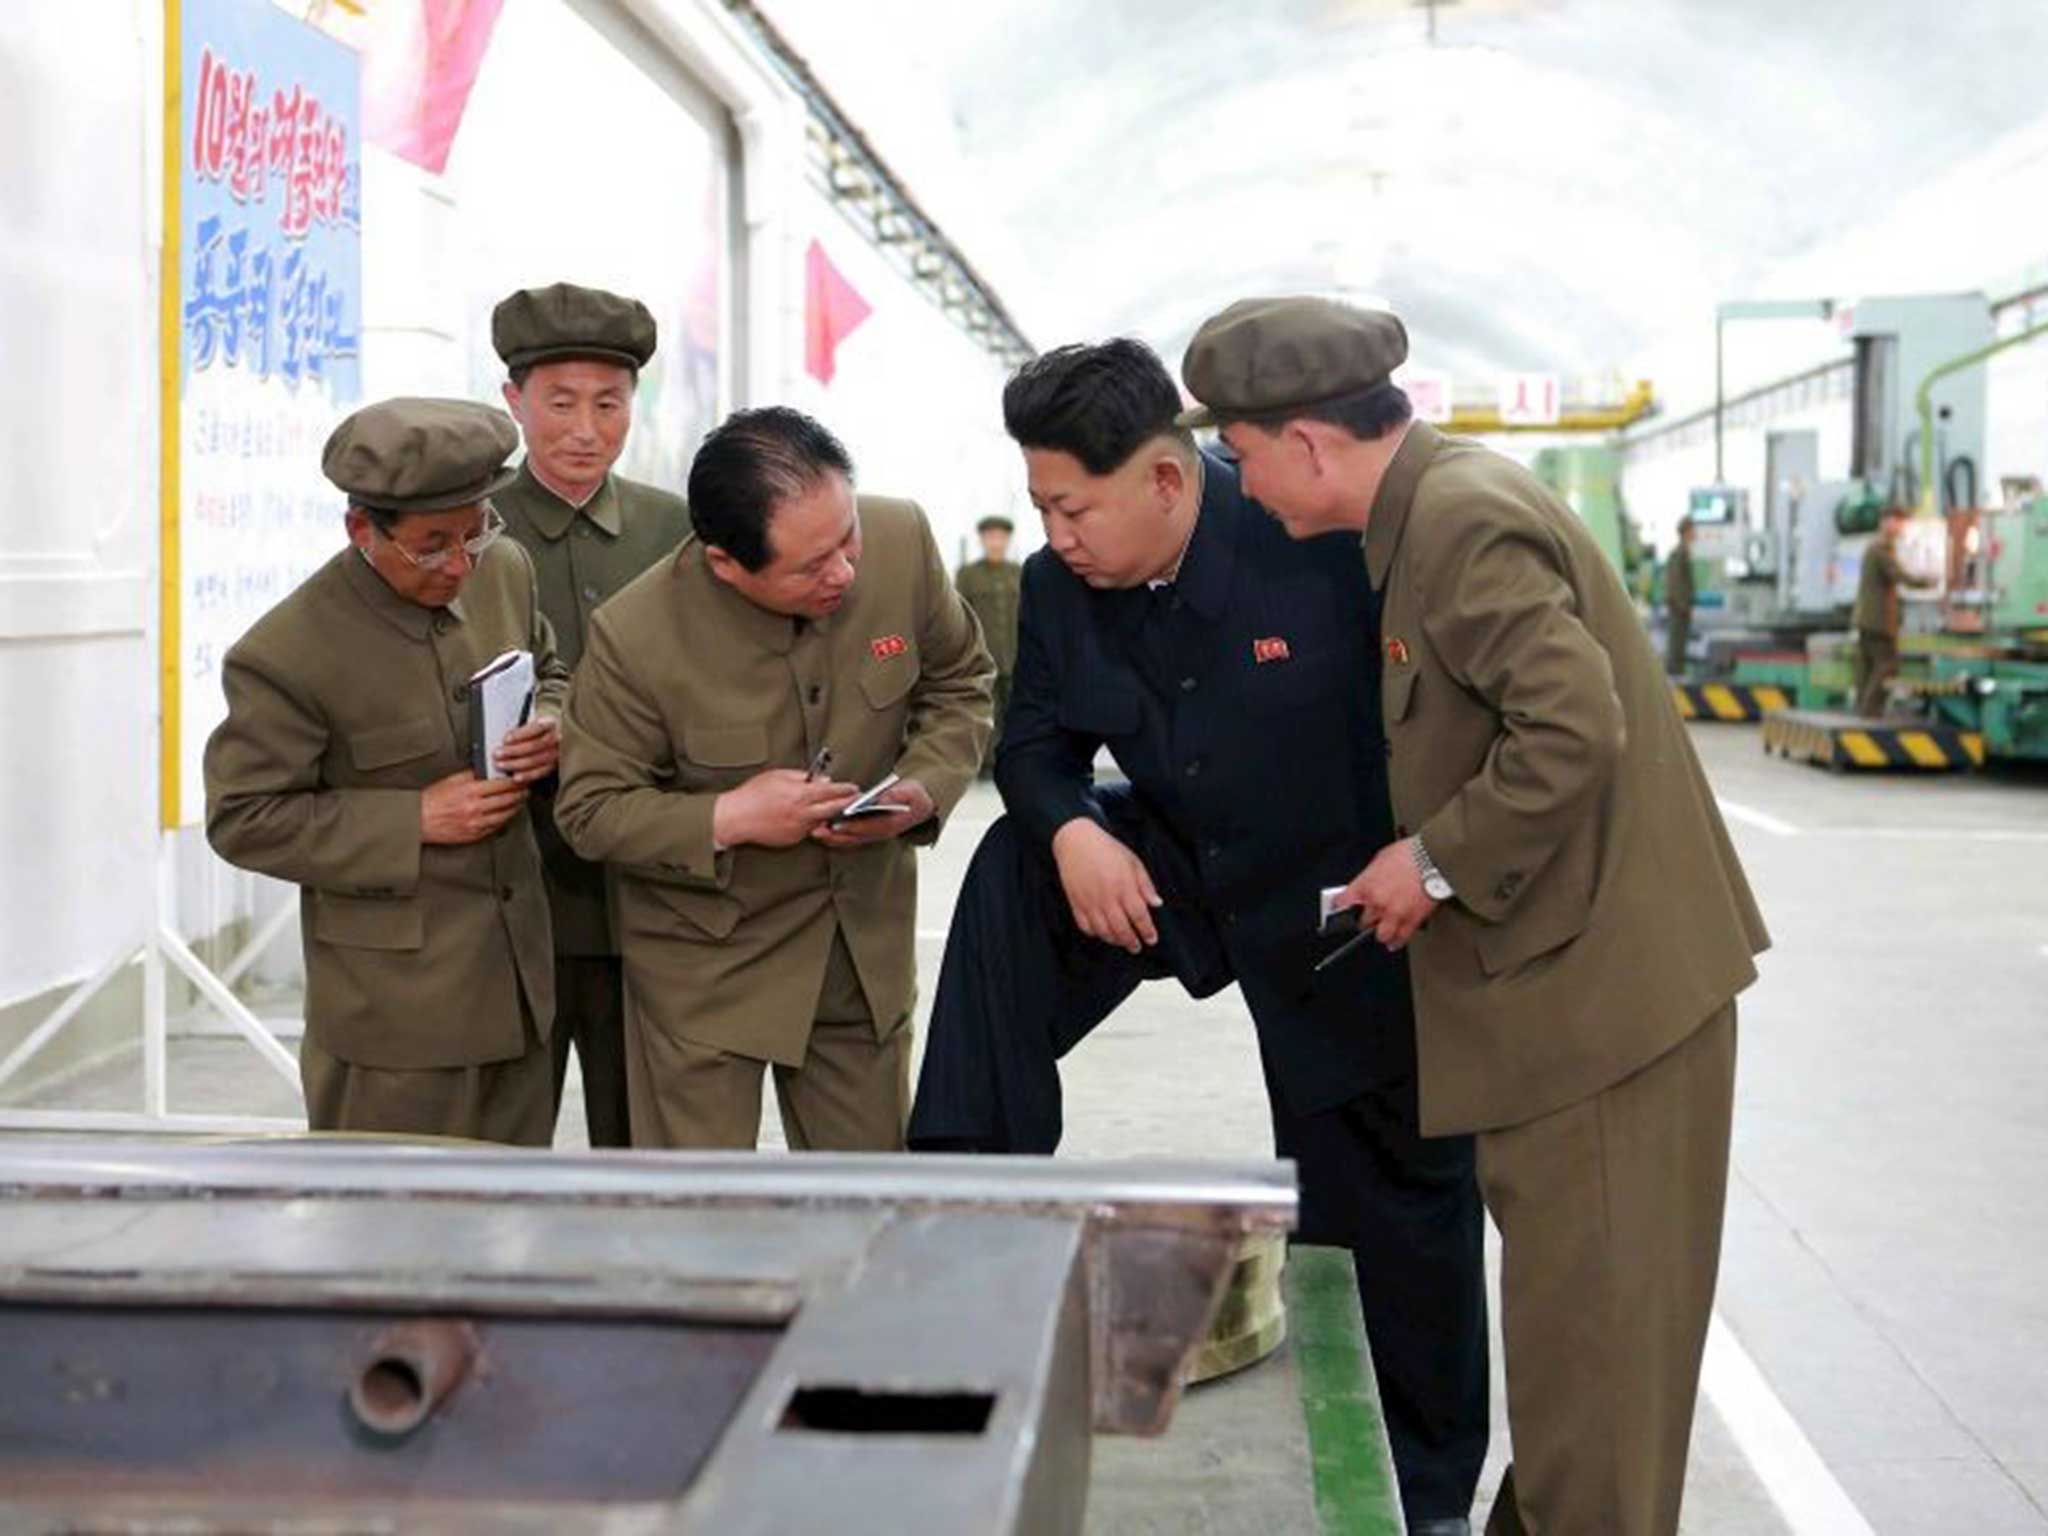 Jim Jong-un is on hand to dispense advice during the ballistic missiles reportedly successful test launch